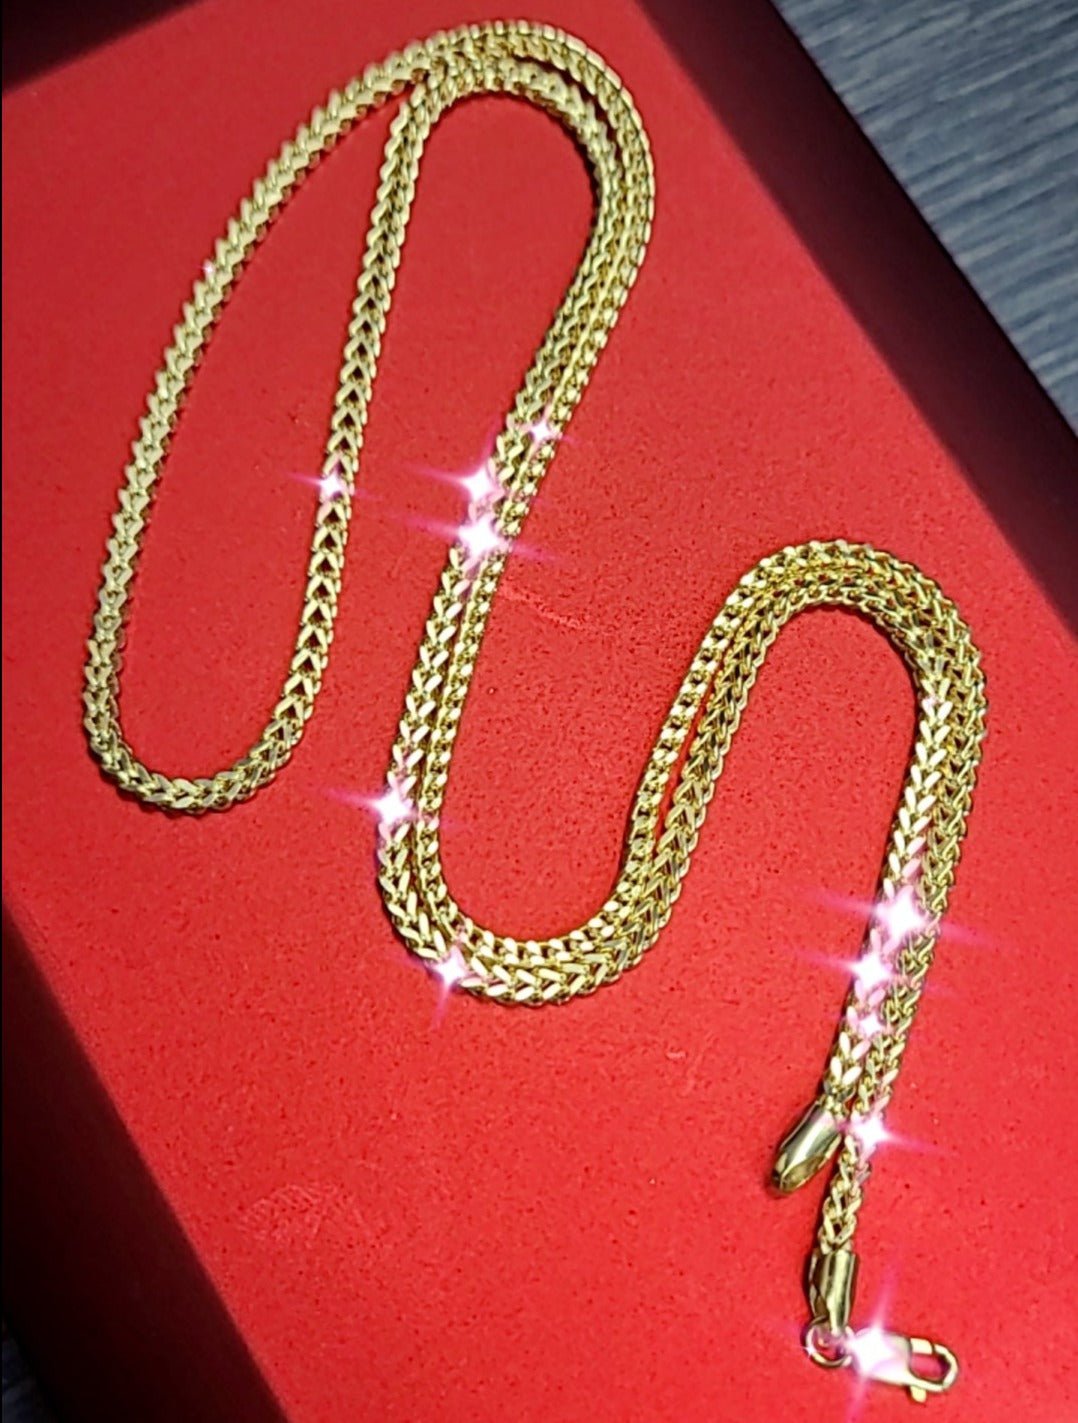 New! 24” 2.25mm 14K Yellow Gold Franco Link Box Chain Necklace 6.84g